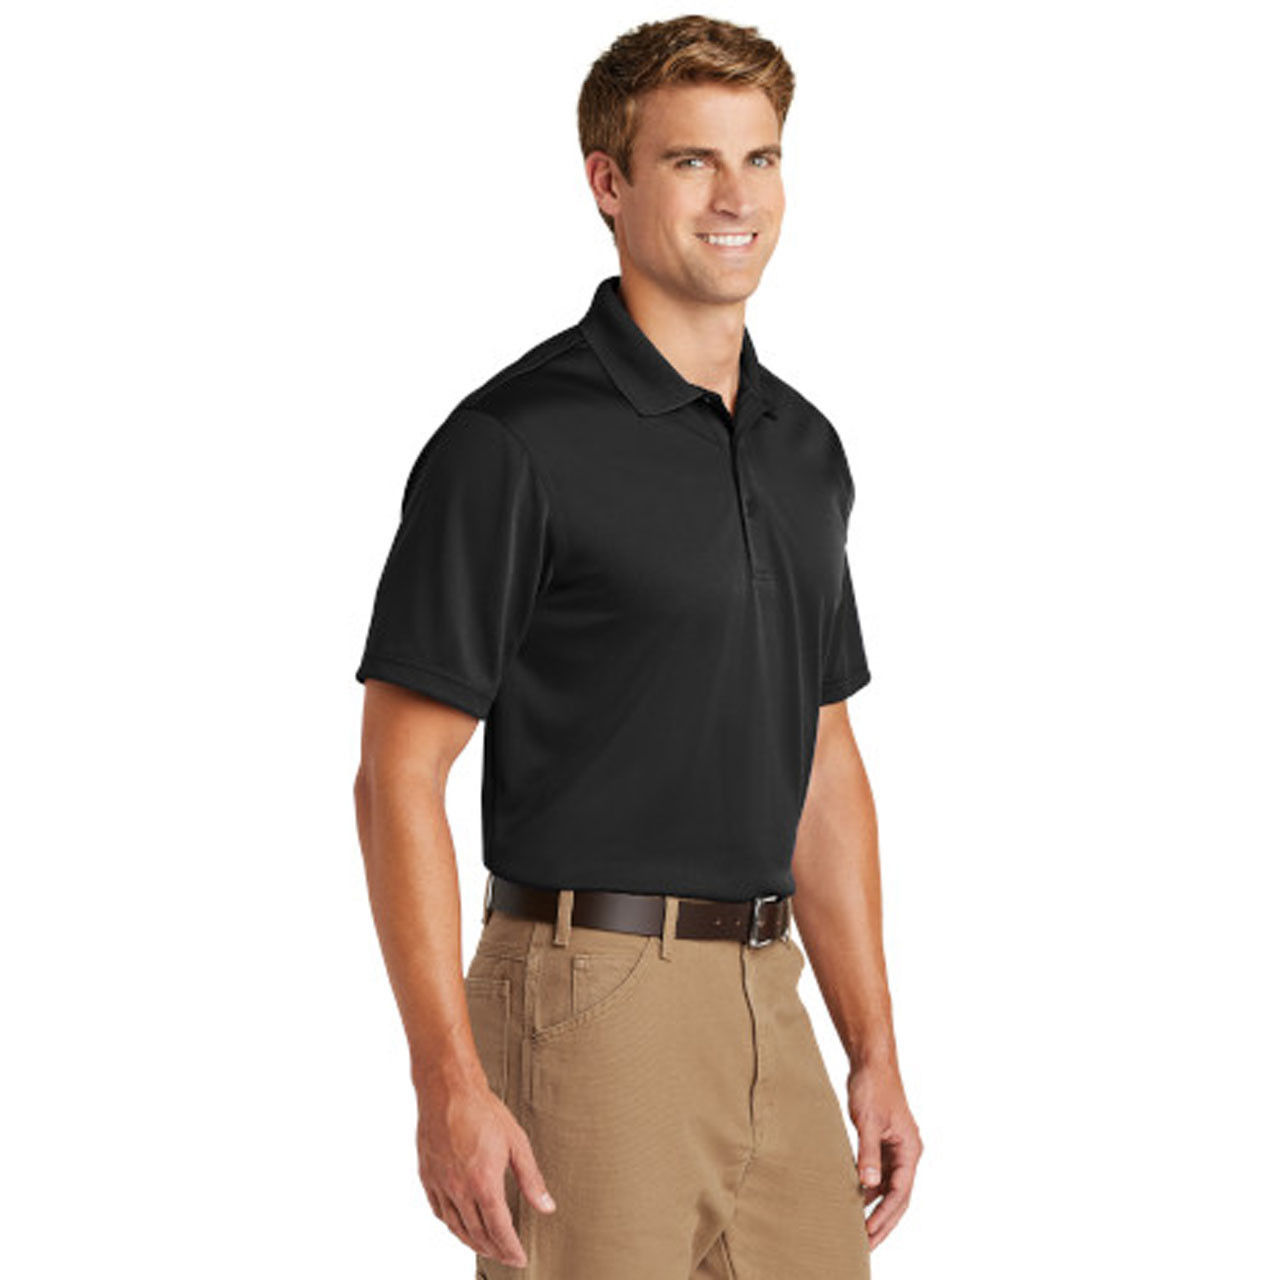 Is the men's black polo shirt suitable for everyday wear?